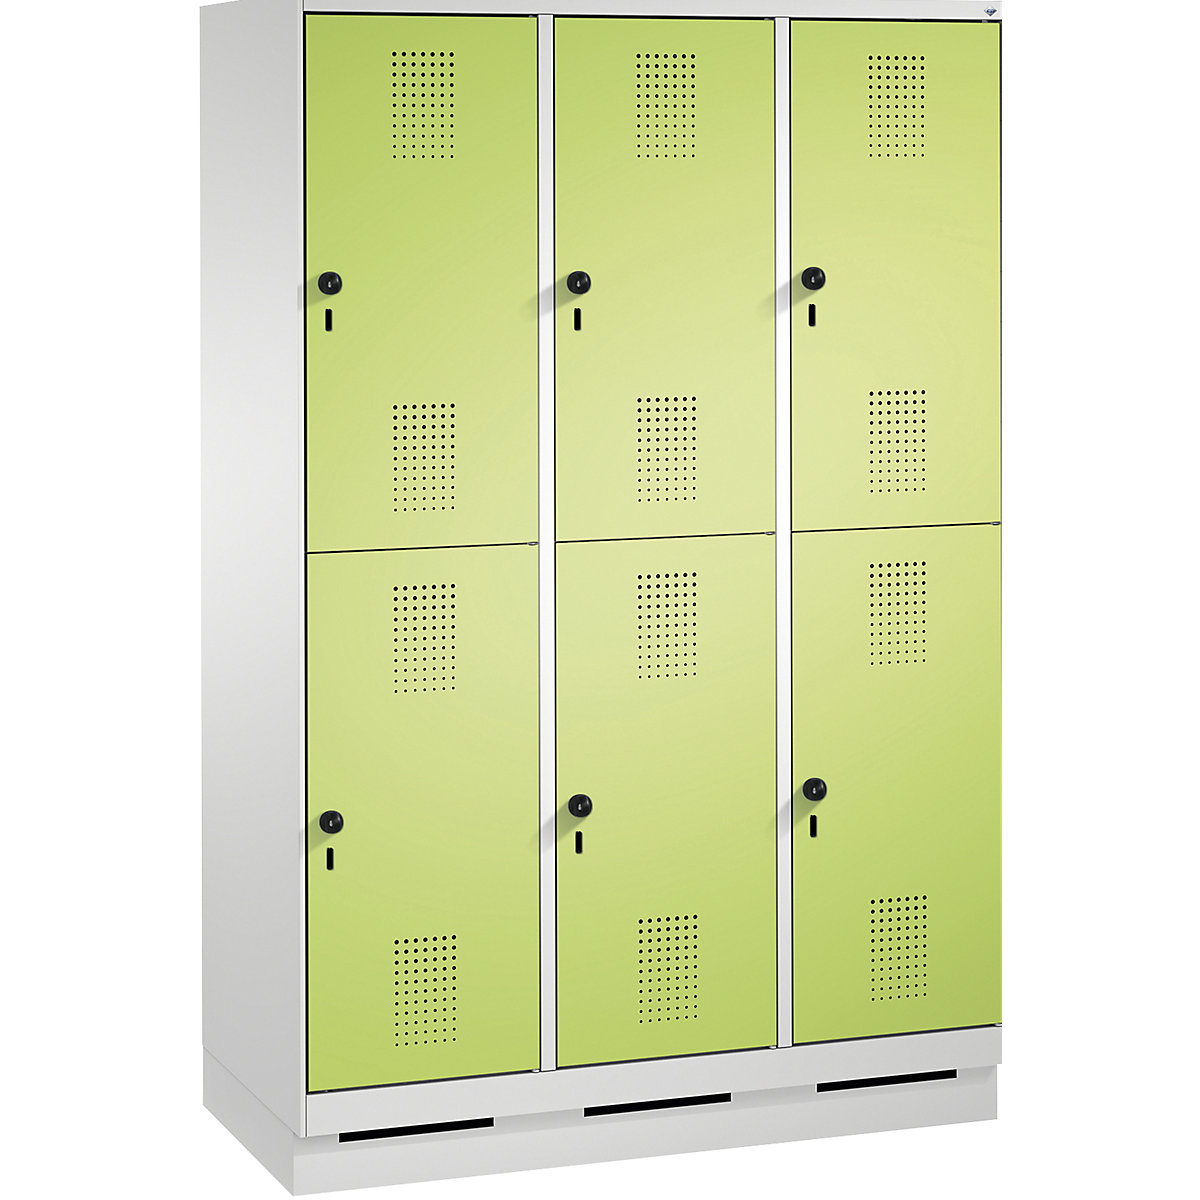 EVOLO cloakroom locker, double tier, with plinth – C+P, 3 compartments, 2 shelf compartments each, compartment width 400 mm, light grey / viridian green-10